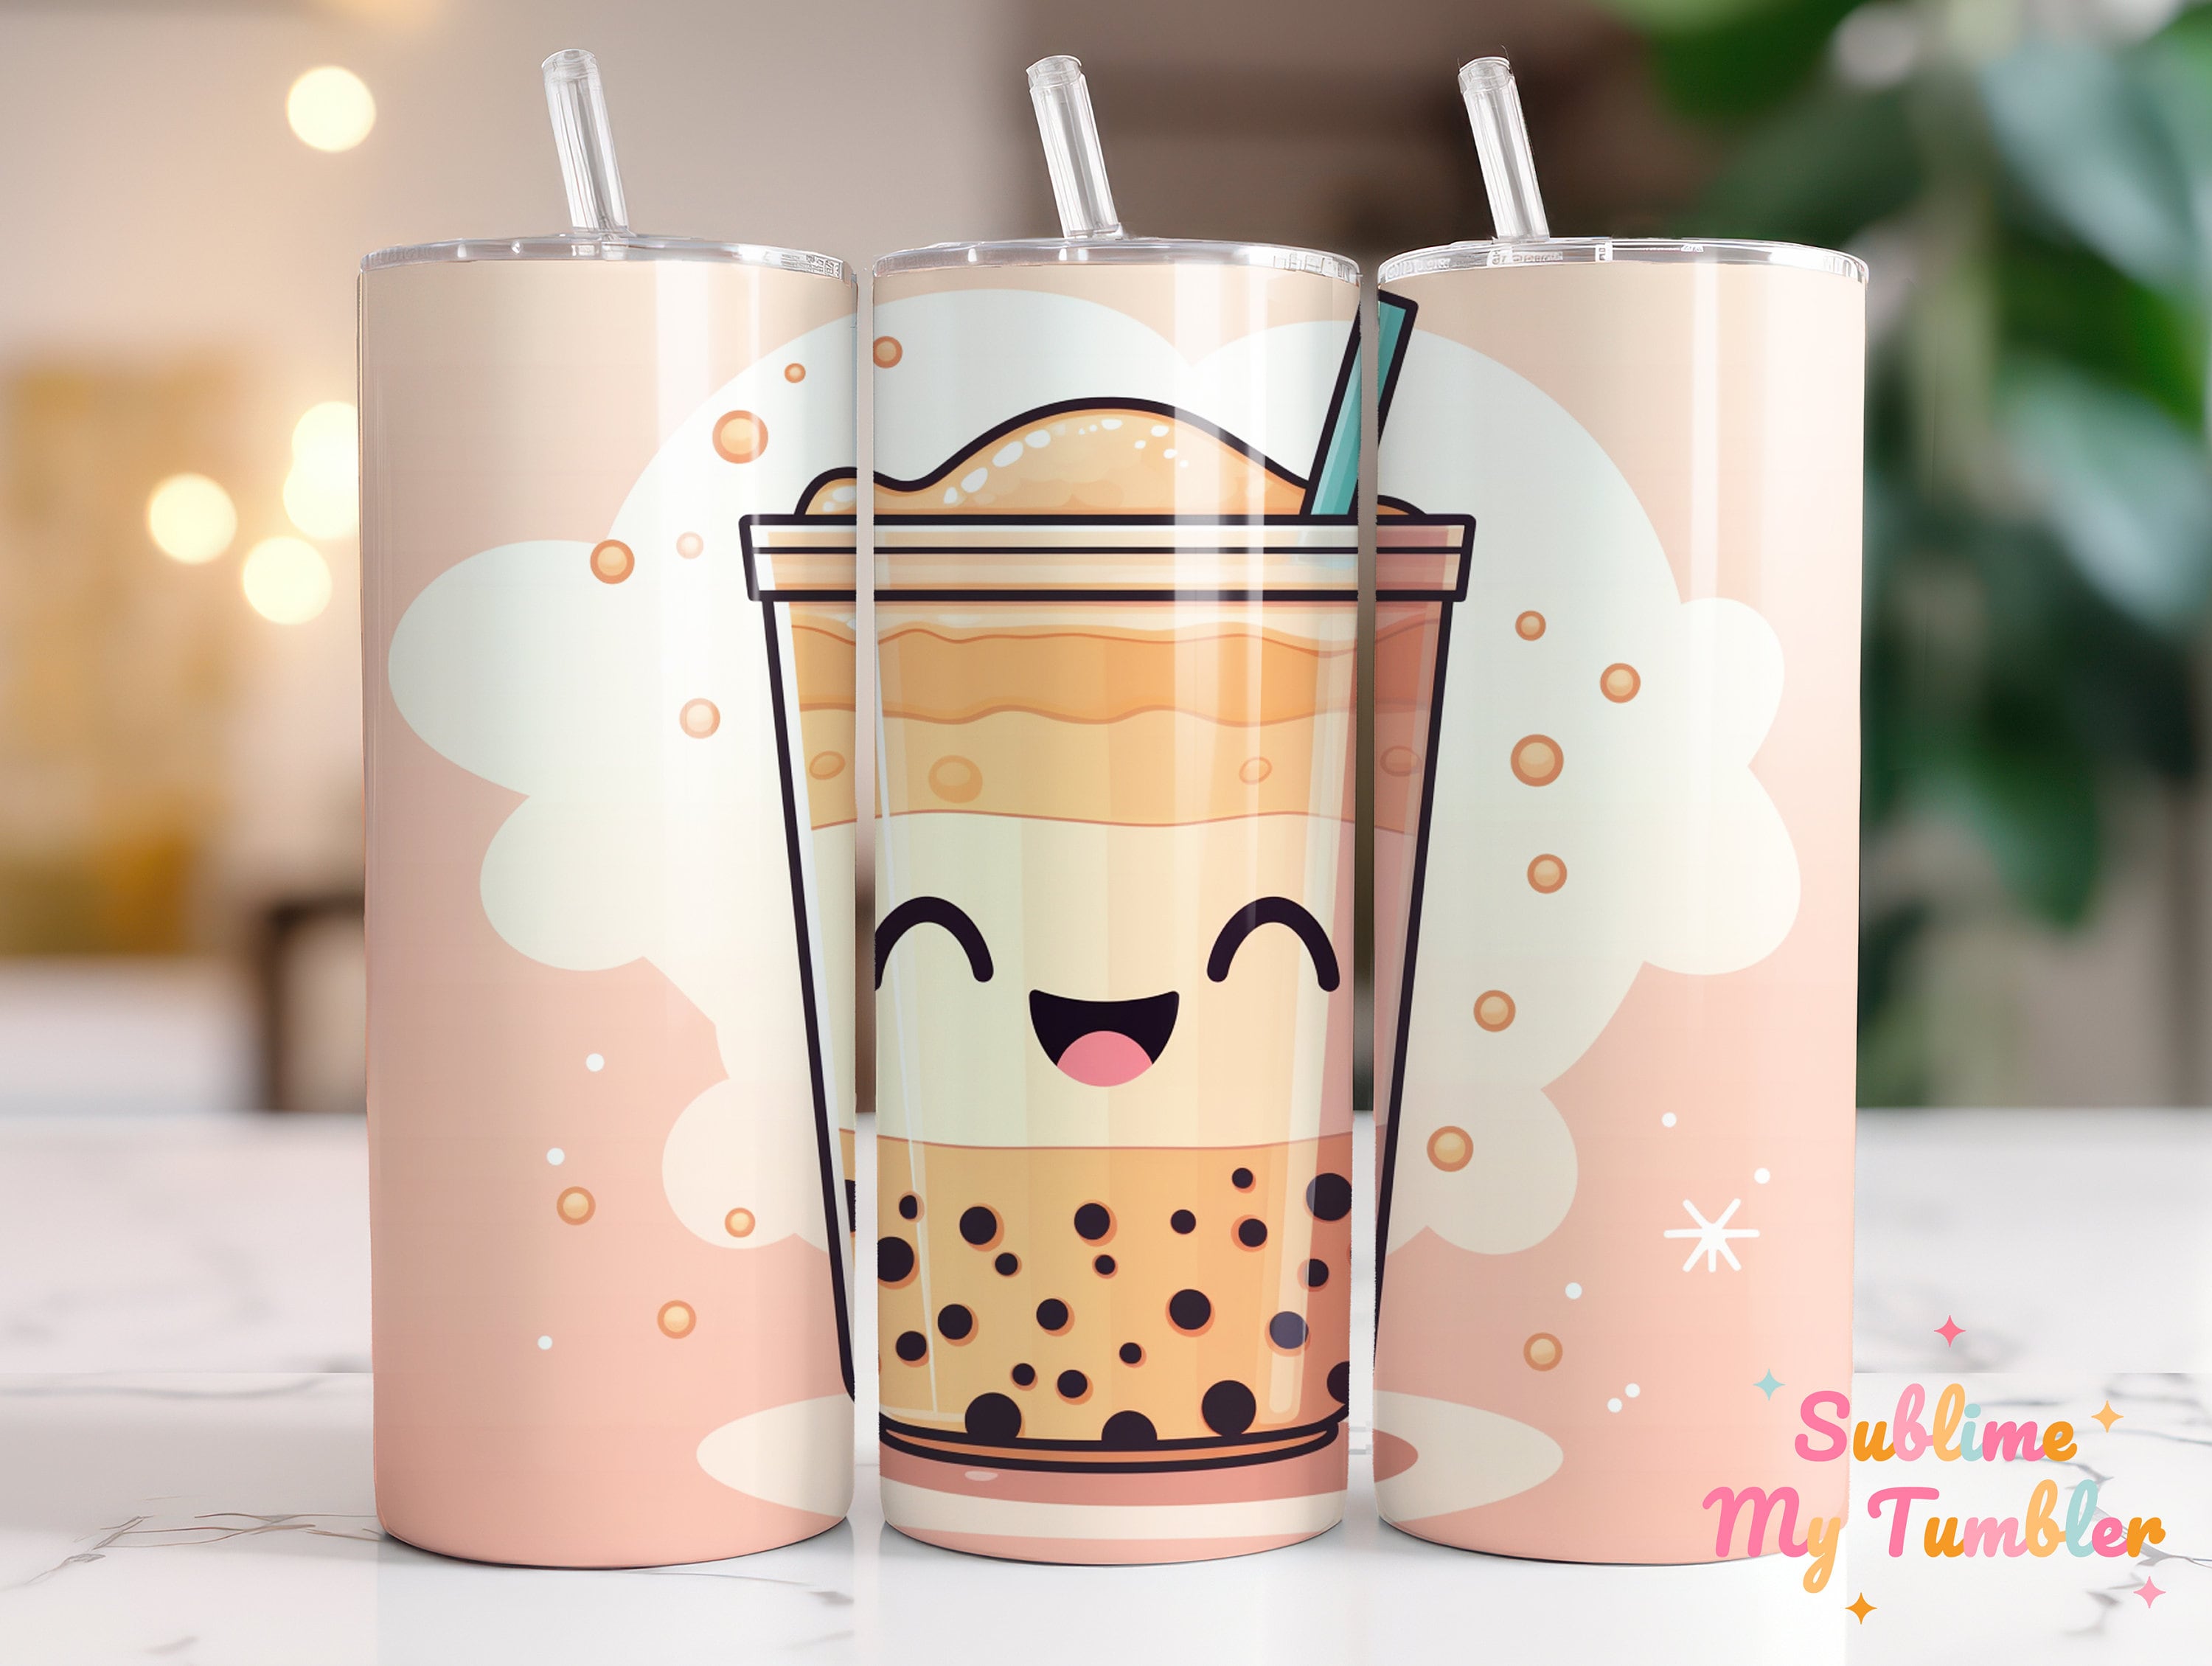 MOODIE Reusable Boba Cup, Bubble Tea Cup, Smoothie Cup With Lid